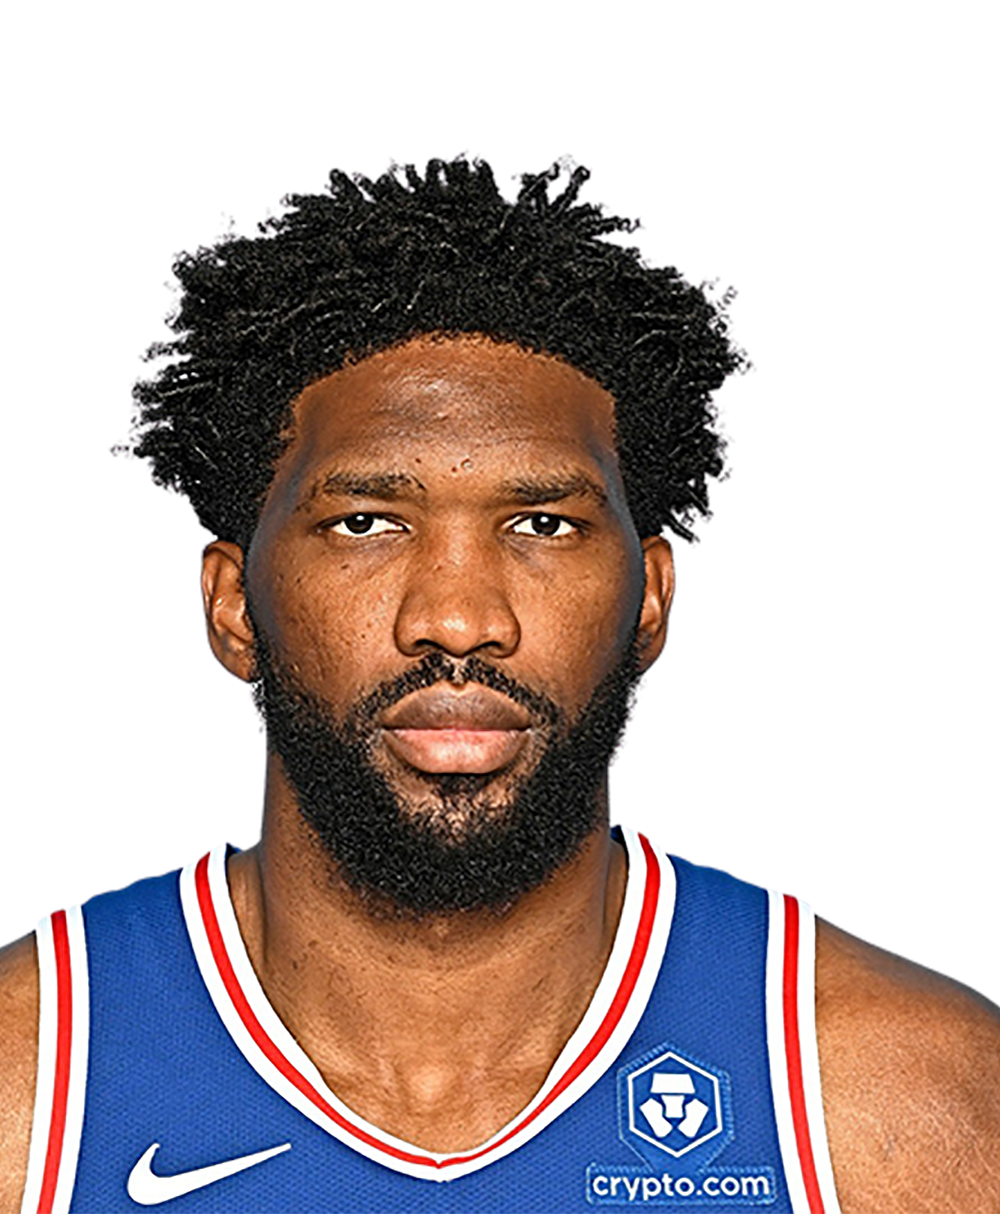 You won't recognize this photo of Joel Embiid from three years ago